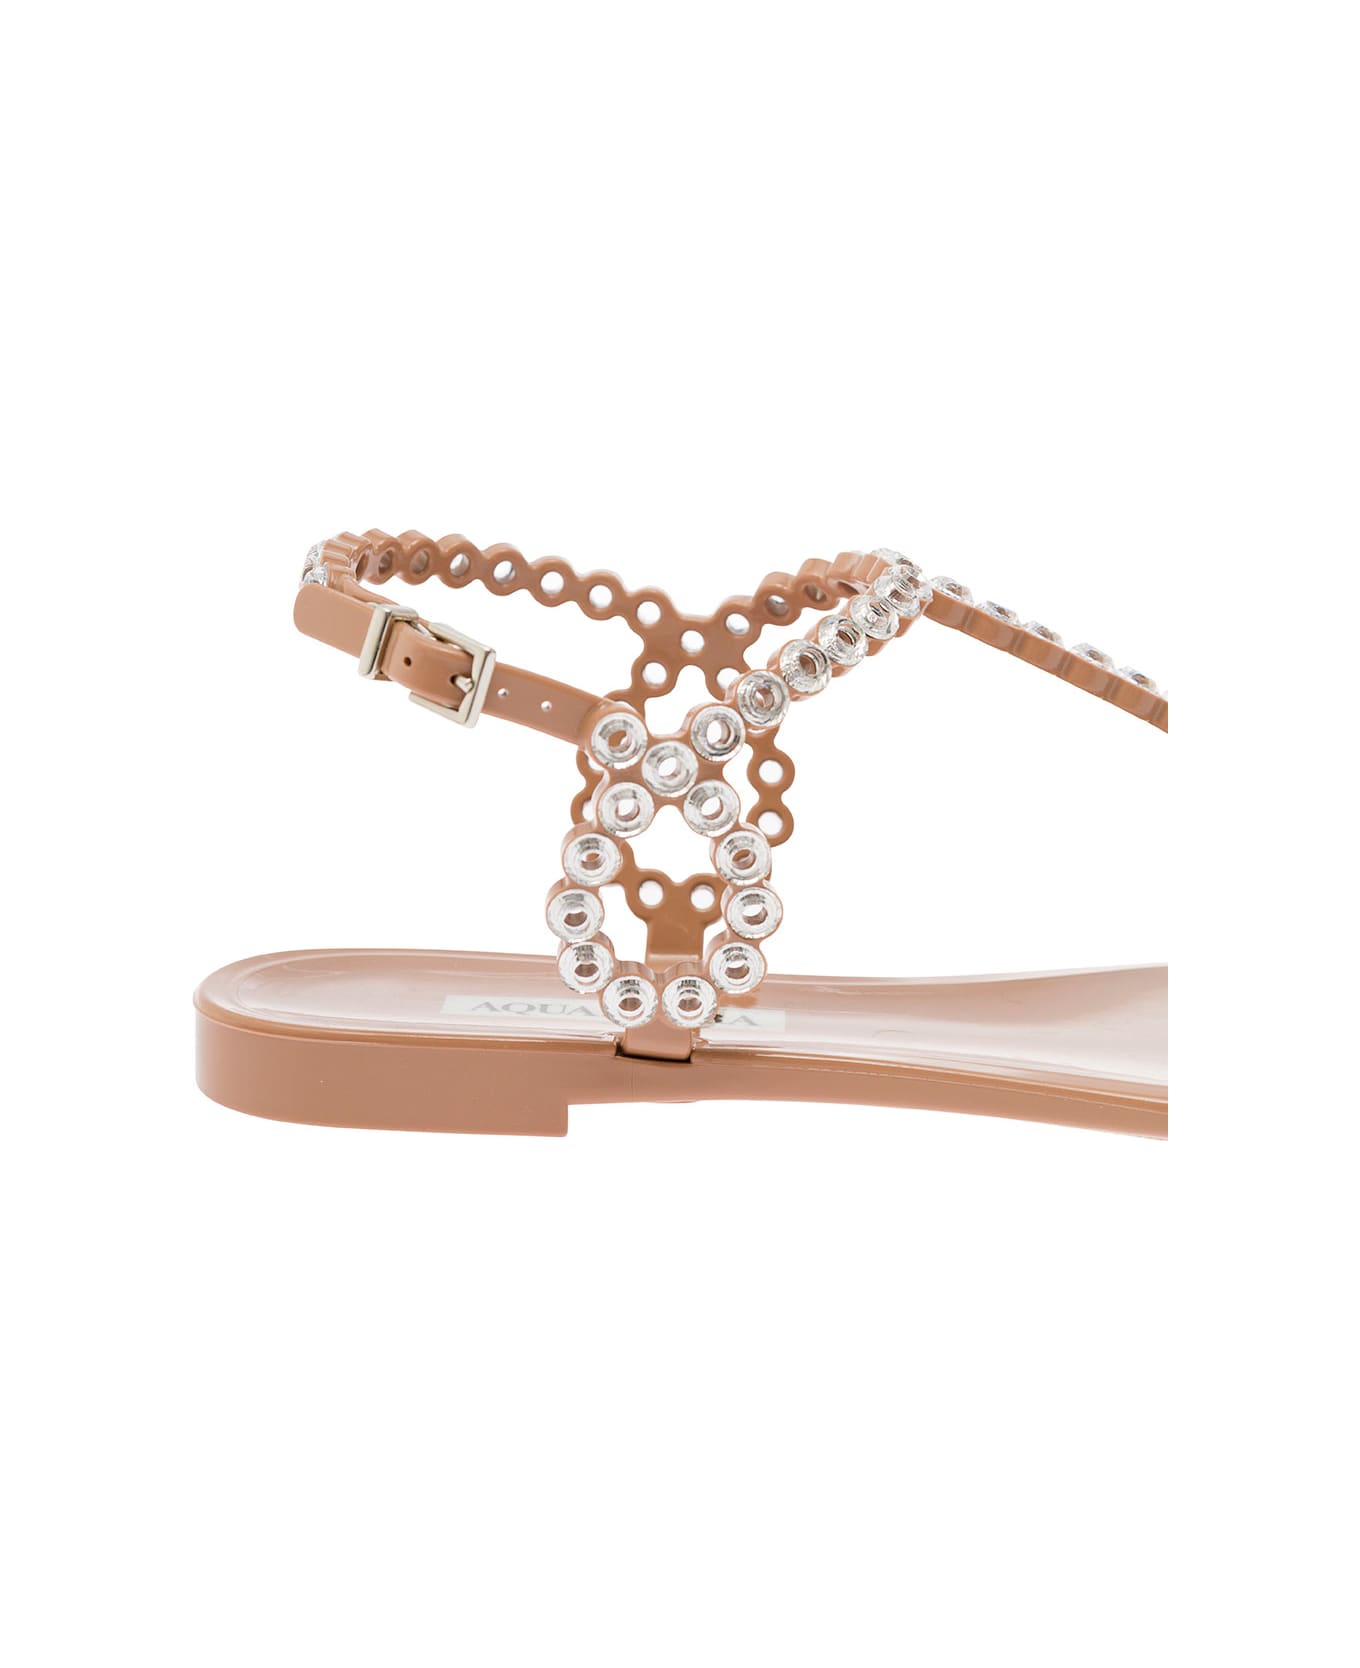 Aquazzura Almost Bare Crystal Jelly Sandals - Pink